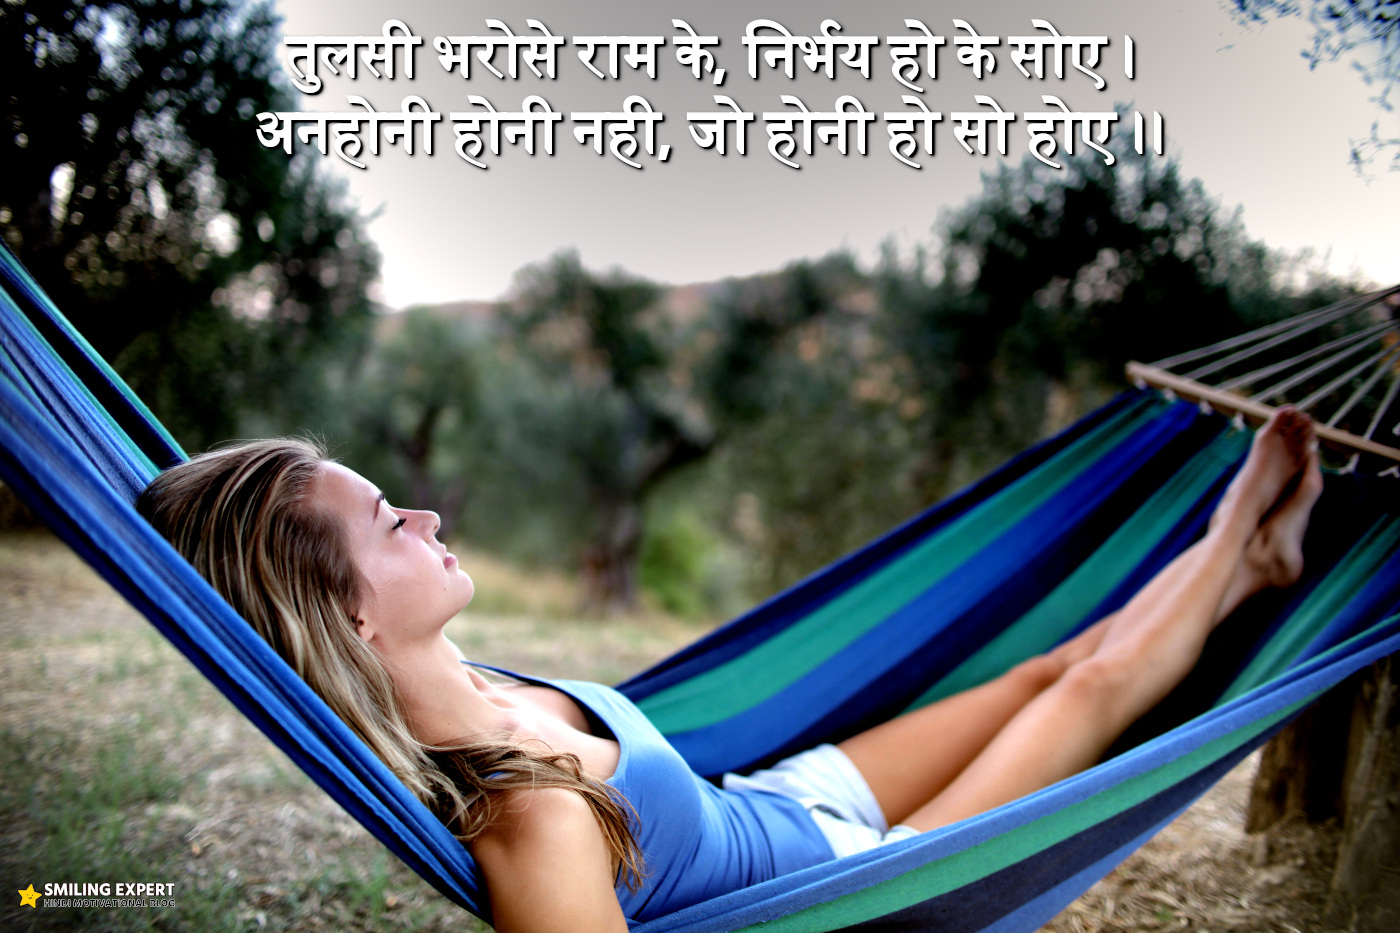 Free Download Motivational Quotes in Hindi Images